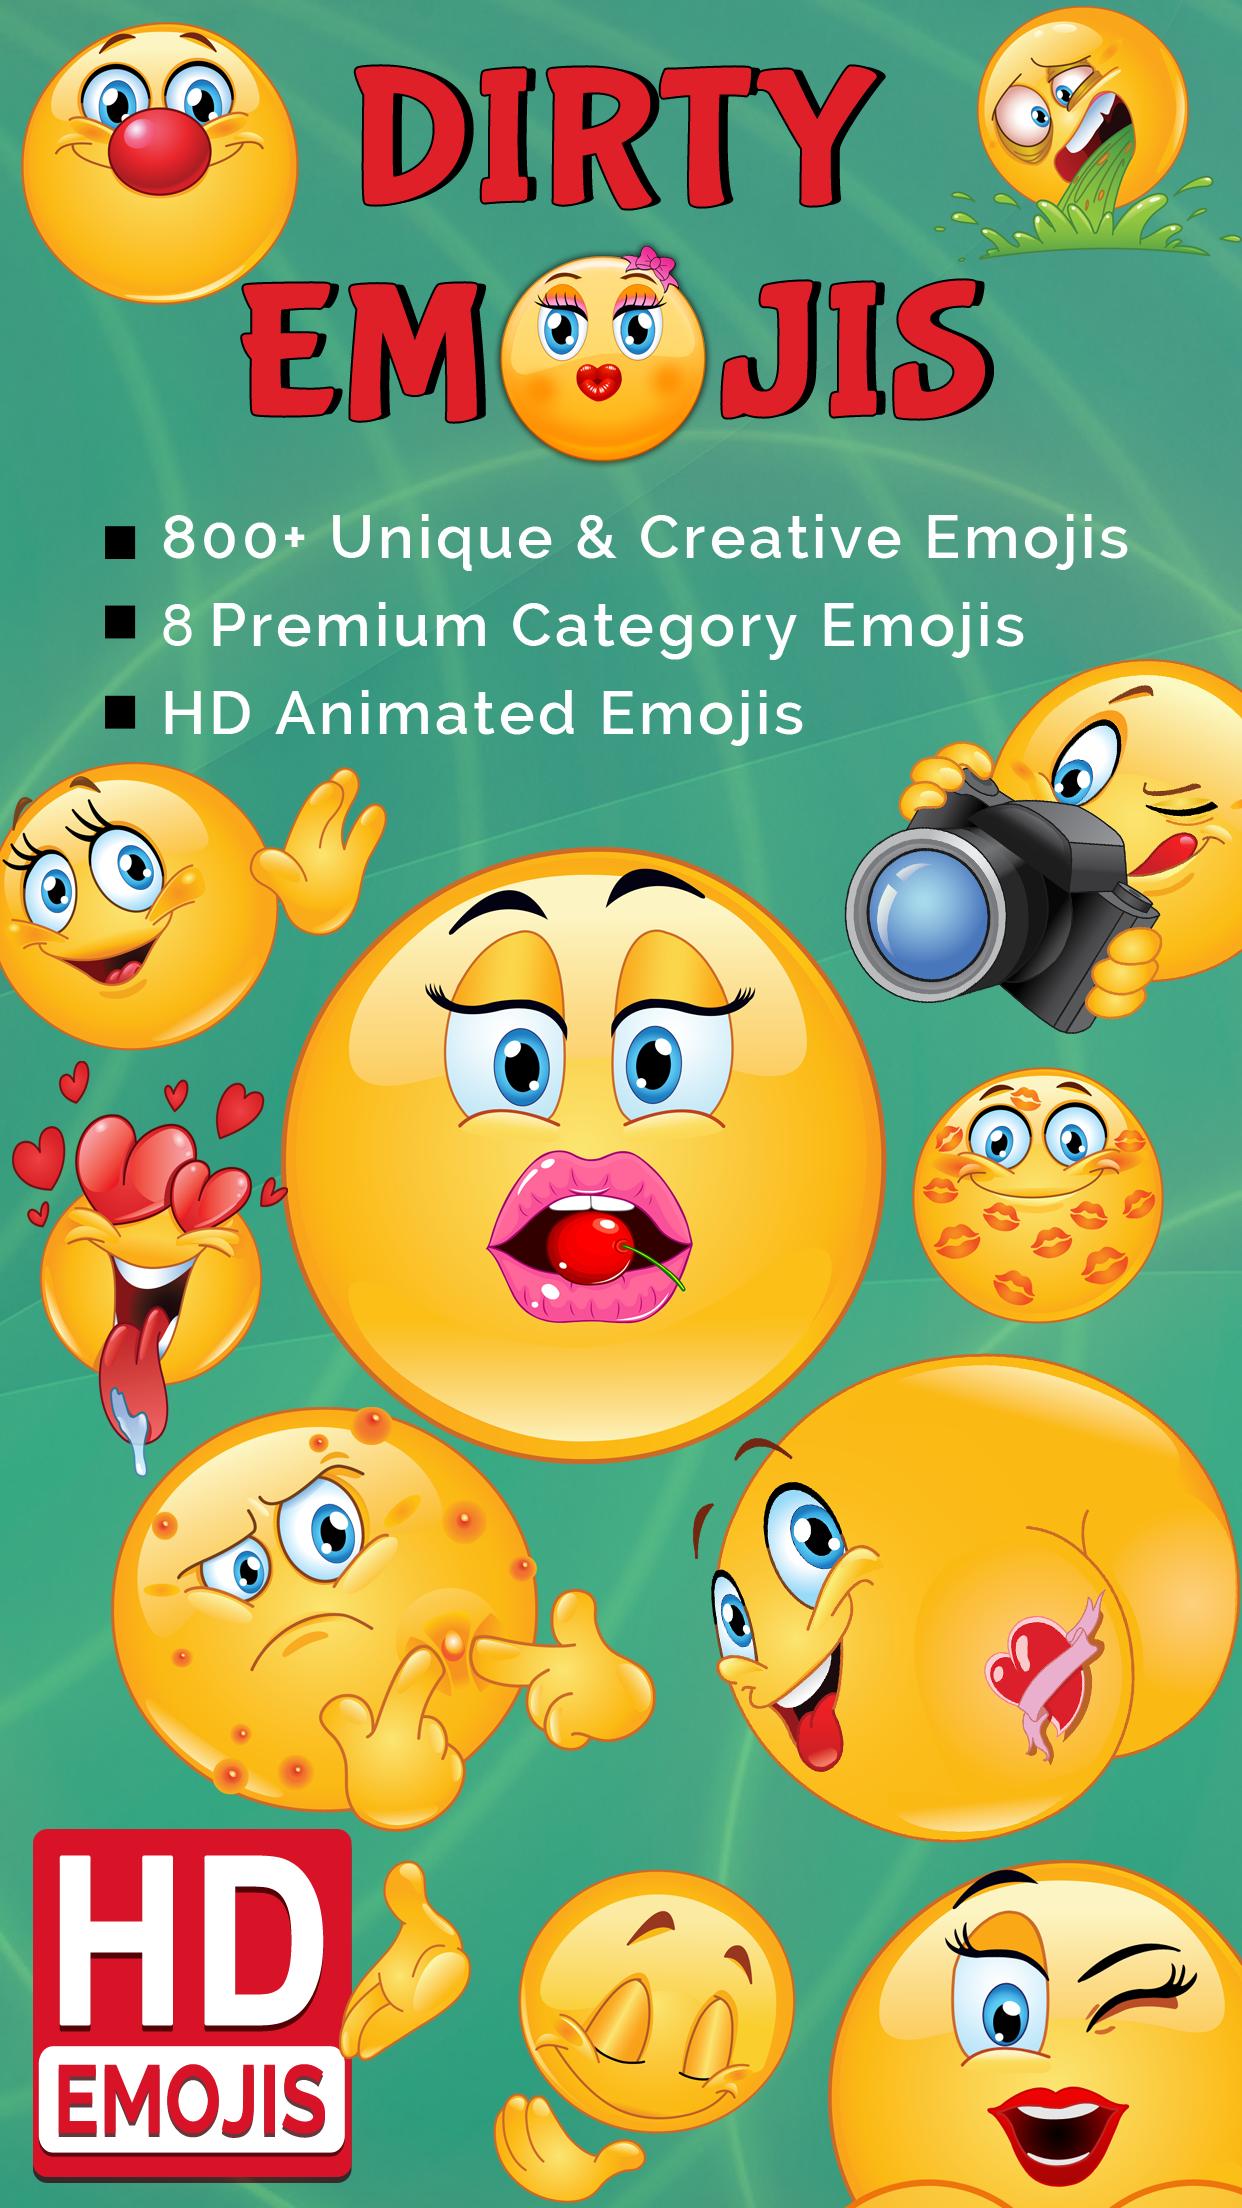 Emoticons sexy text ‎Adult Dirty